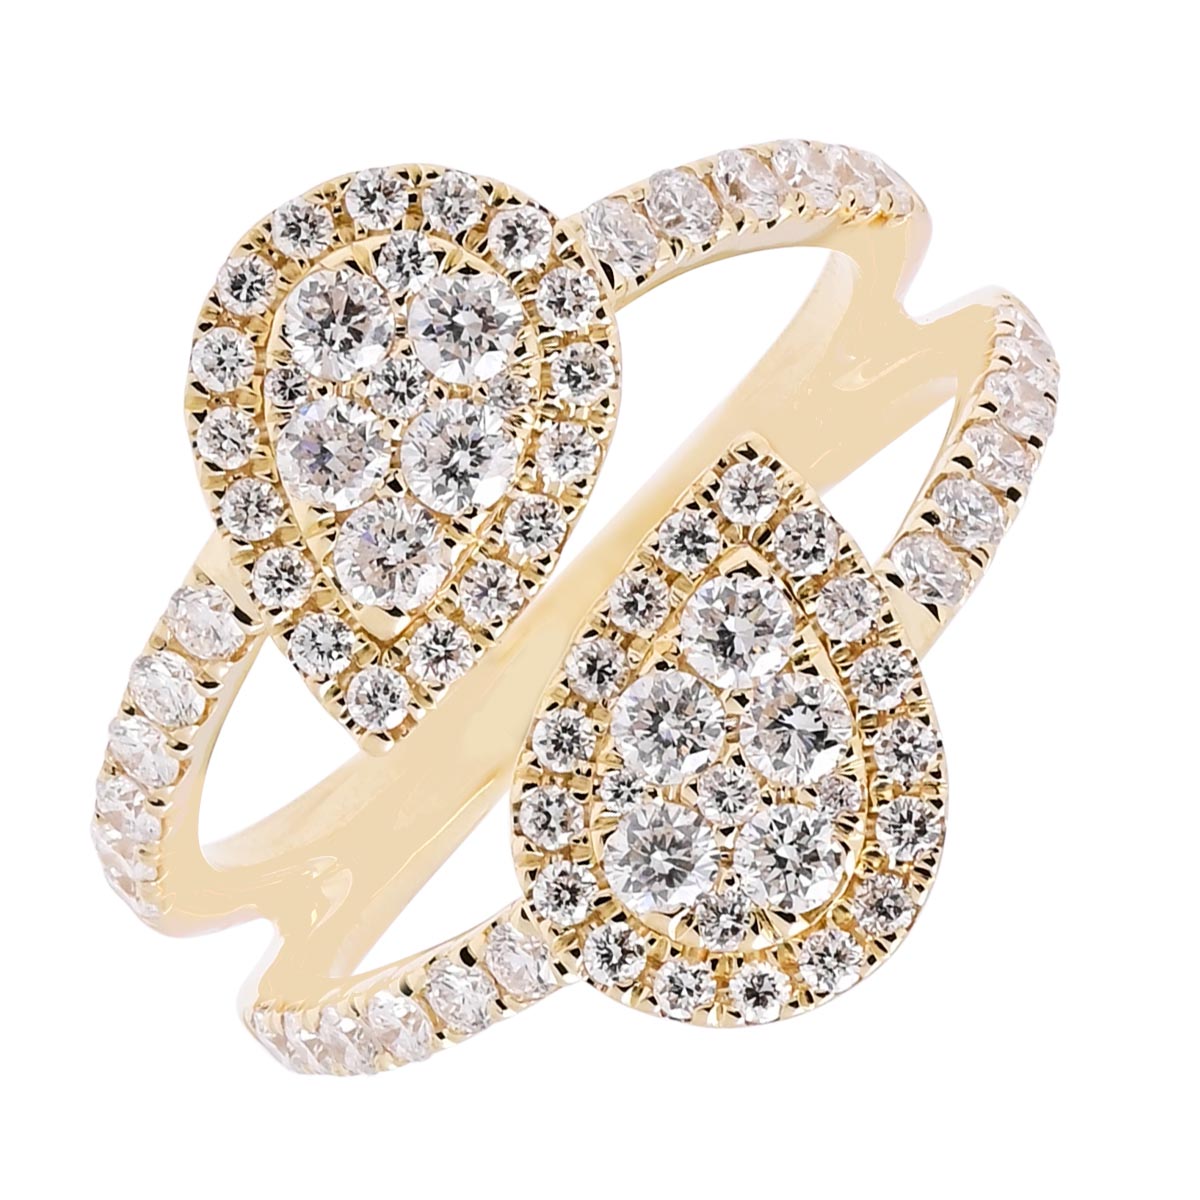 Diamond Pear Shape Fashion Ring in 14kt Yellow Gold (1ct tw)